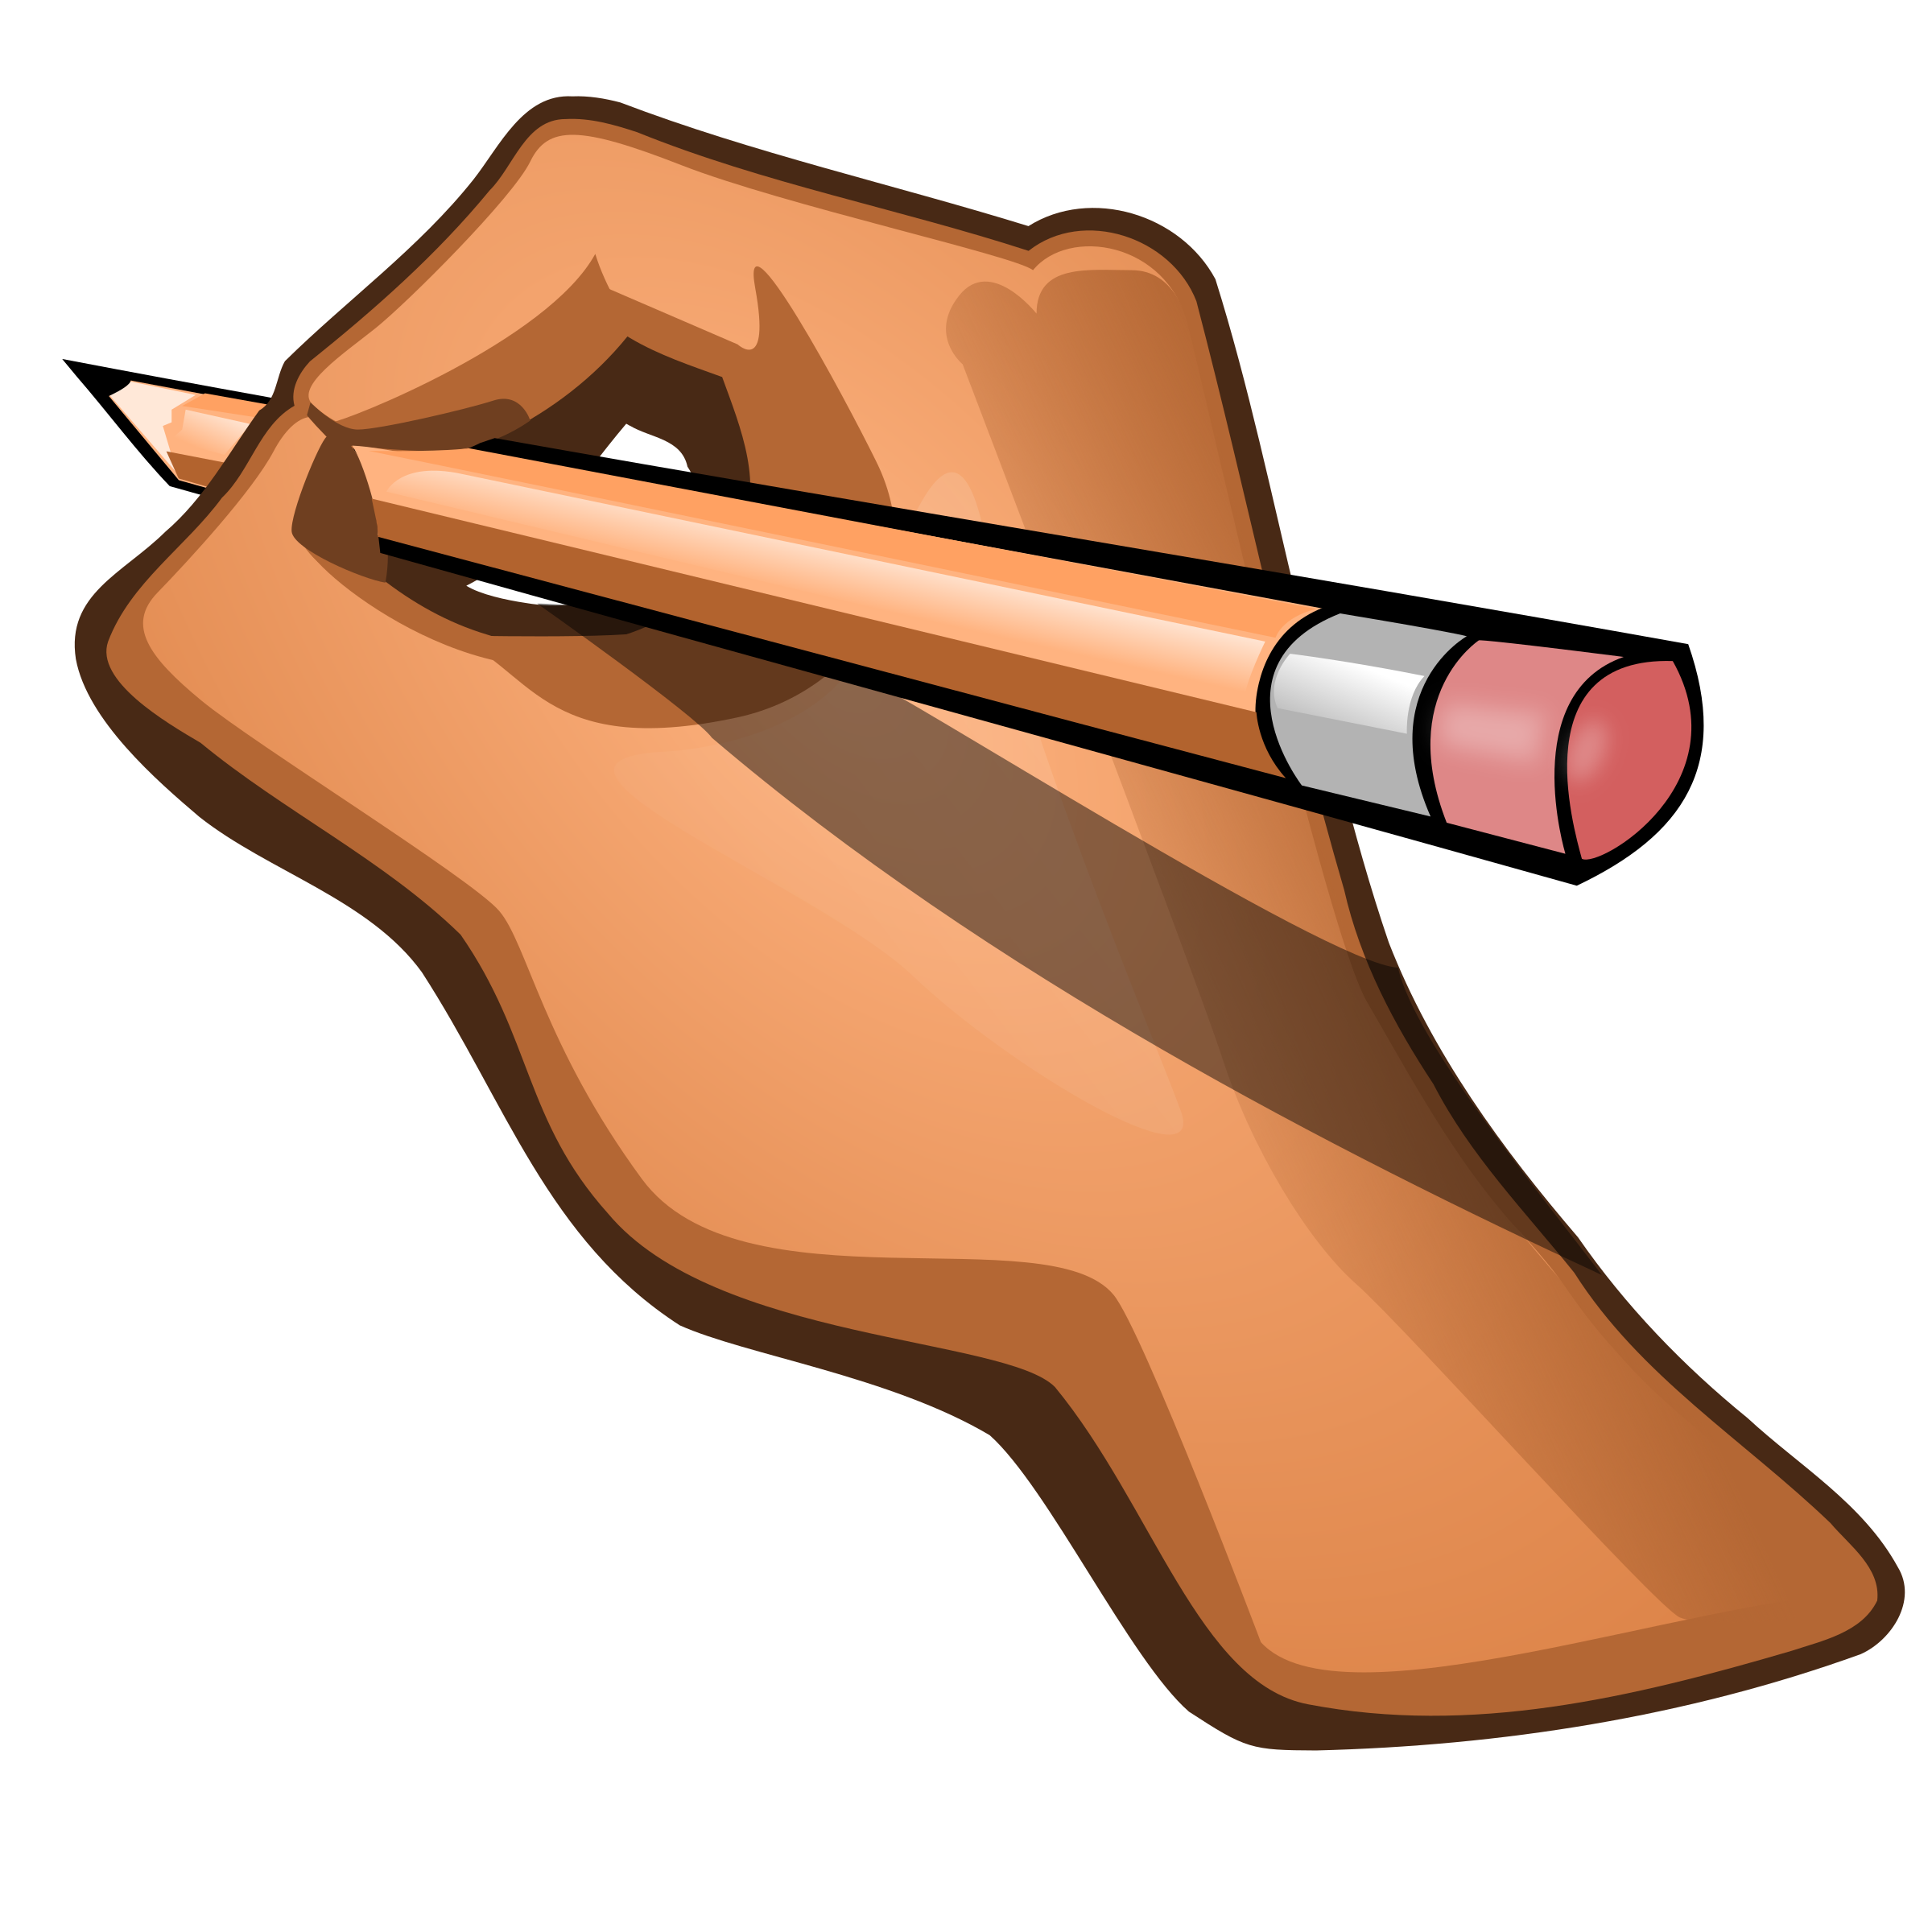 Pencil In Hand Clipart